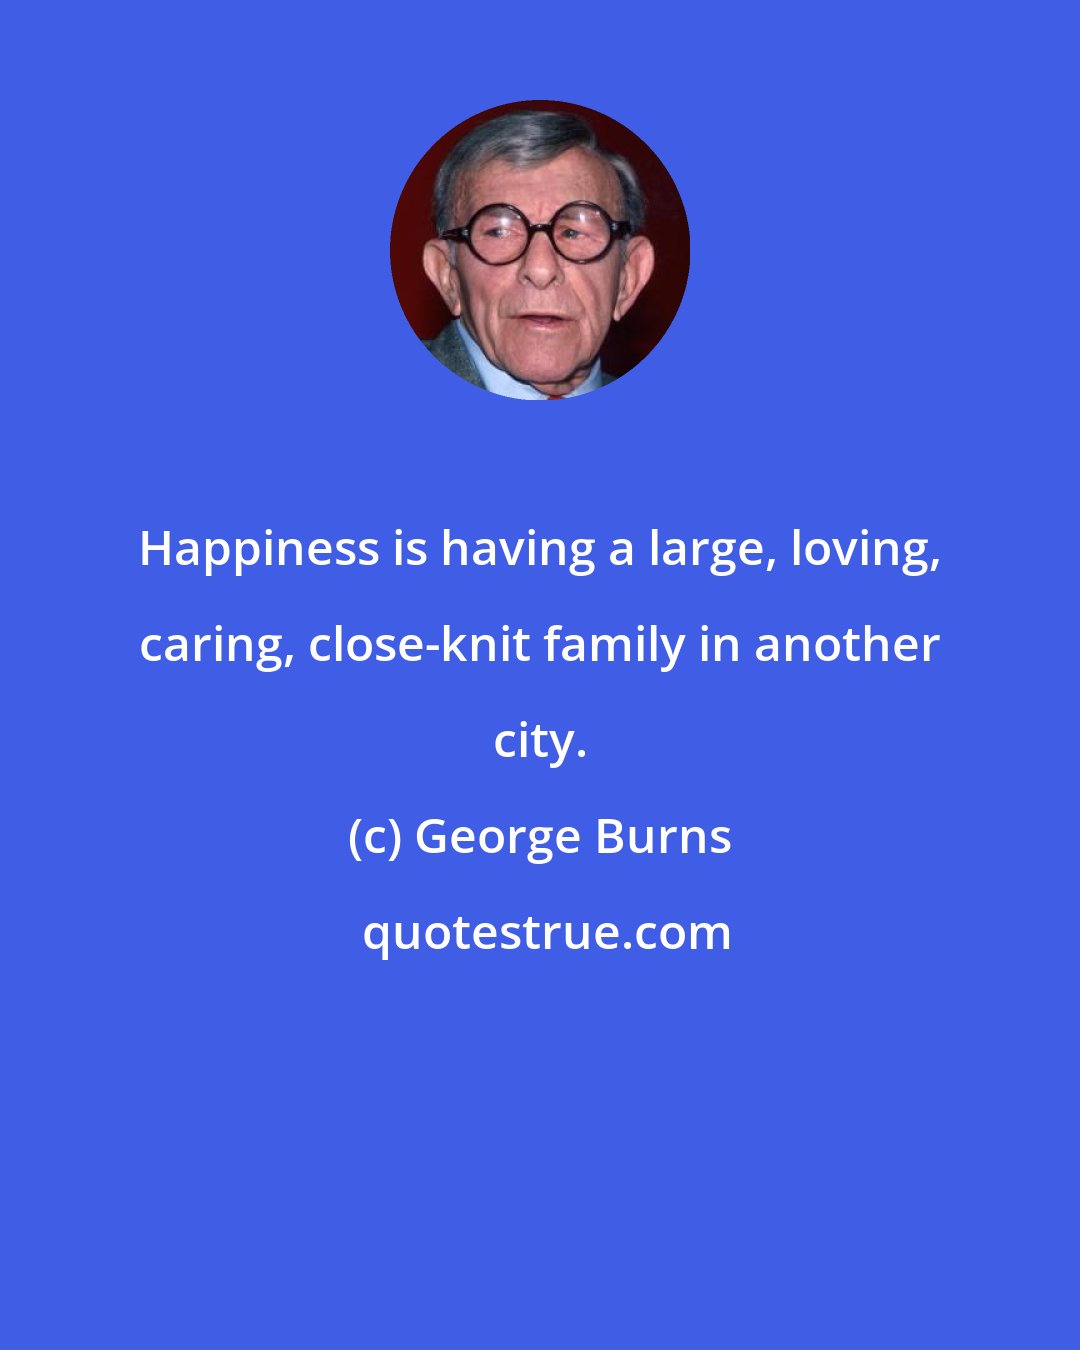 George Burns: Happiness is having a large, loving, caring, close-knit family in another city.